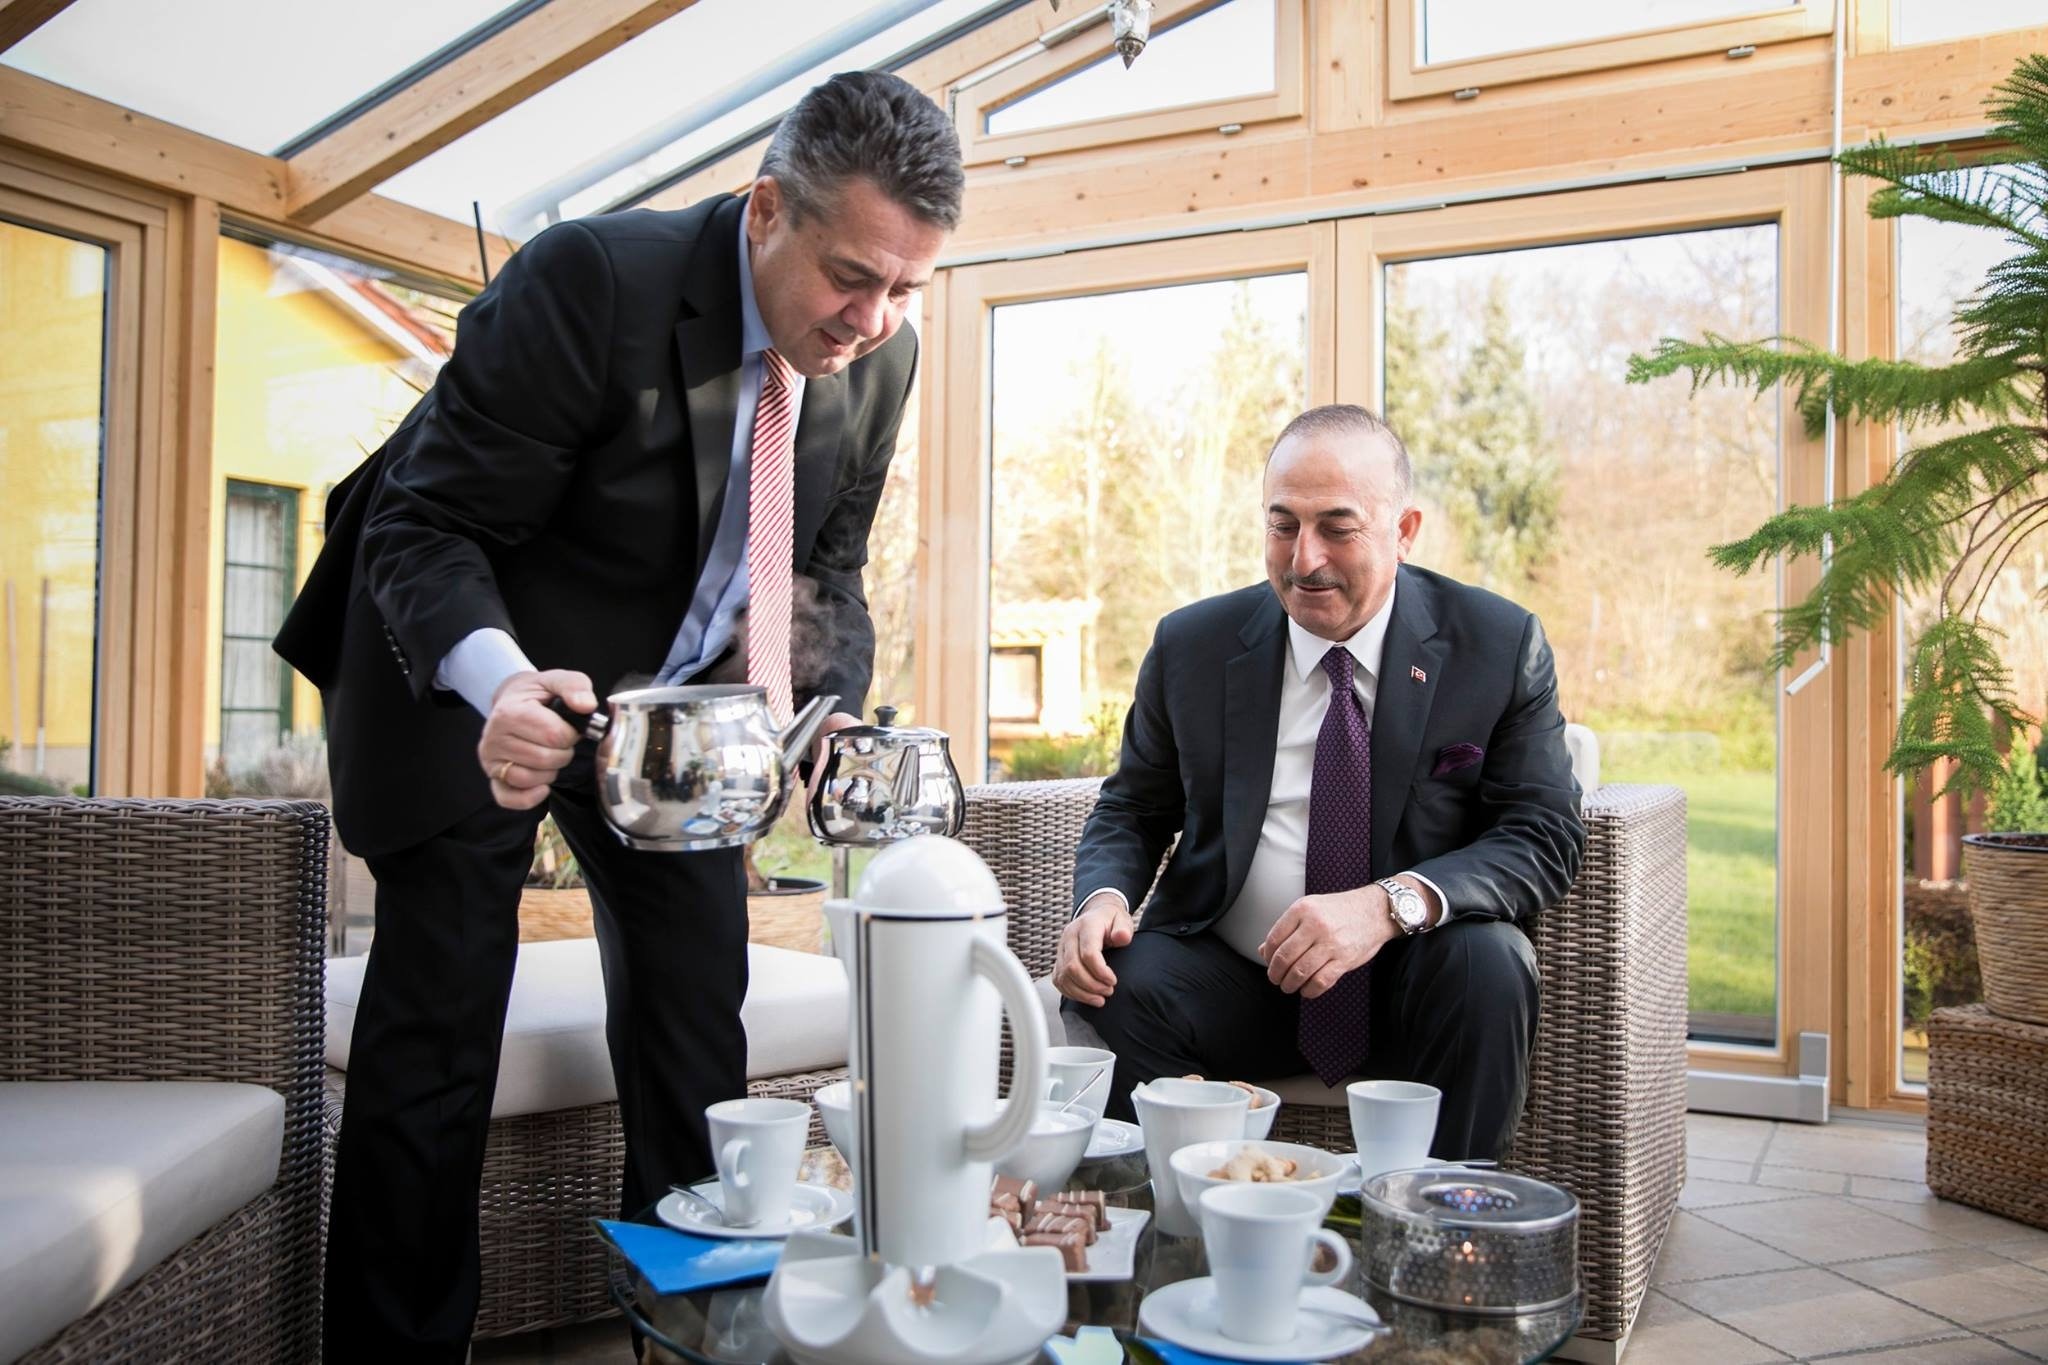 German Foreign Minister Sigmar Gabriel pouring Turkish tea for Foreign Minister u00c7avuu015fou011flu in Gabrielu2019s residence in his hometown Goslar, a central German city, Jan. 6.